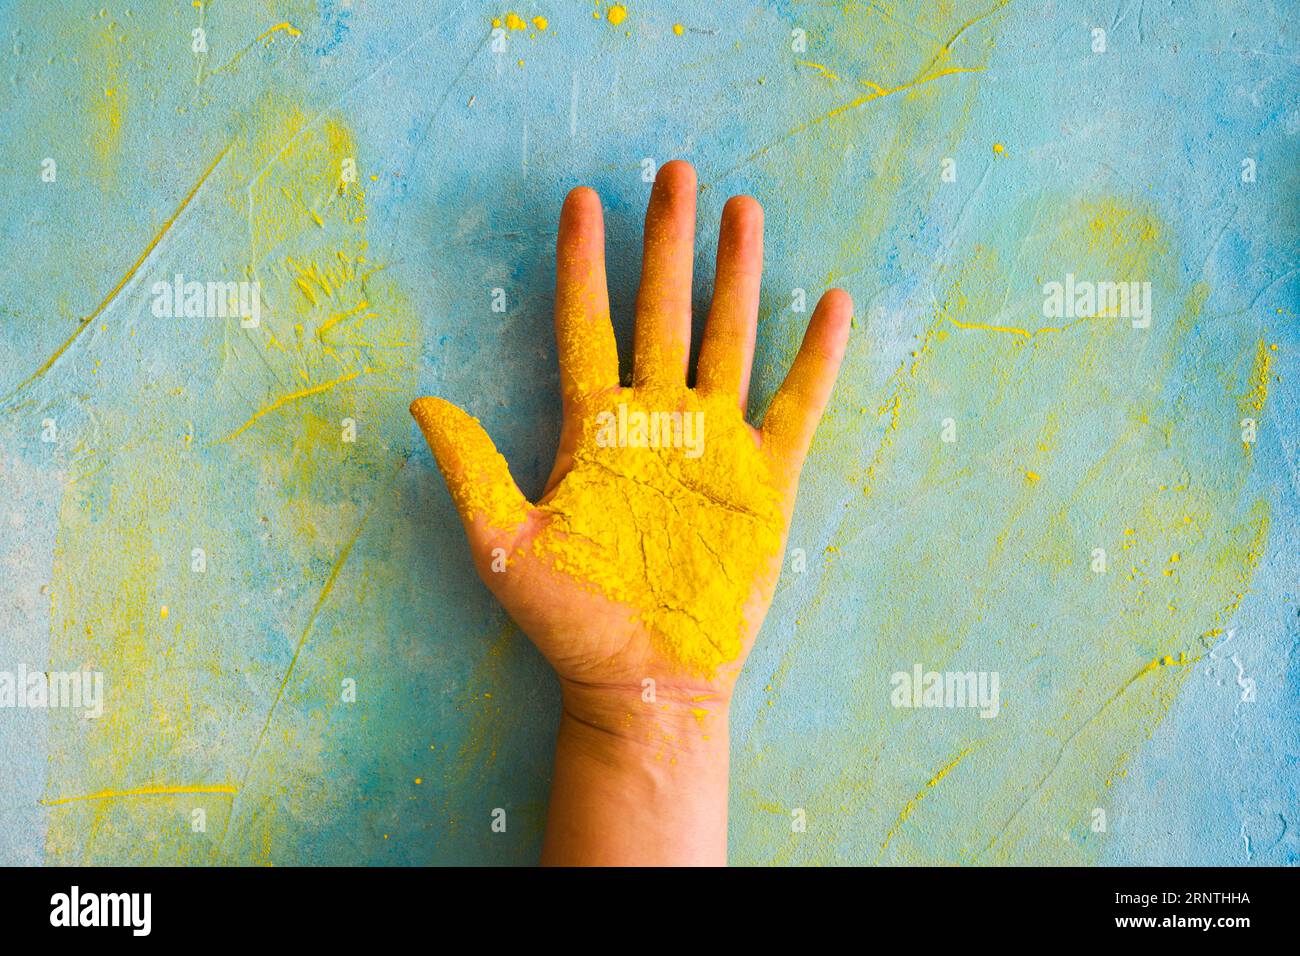 Yellow powder person s palm against painted messy wall with color Stock Photo